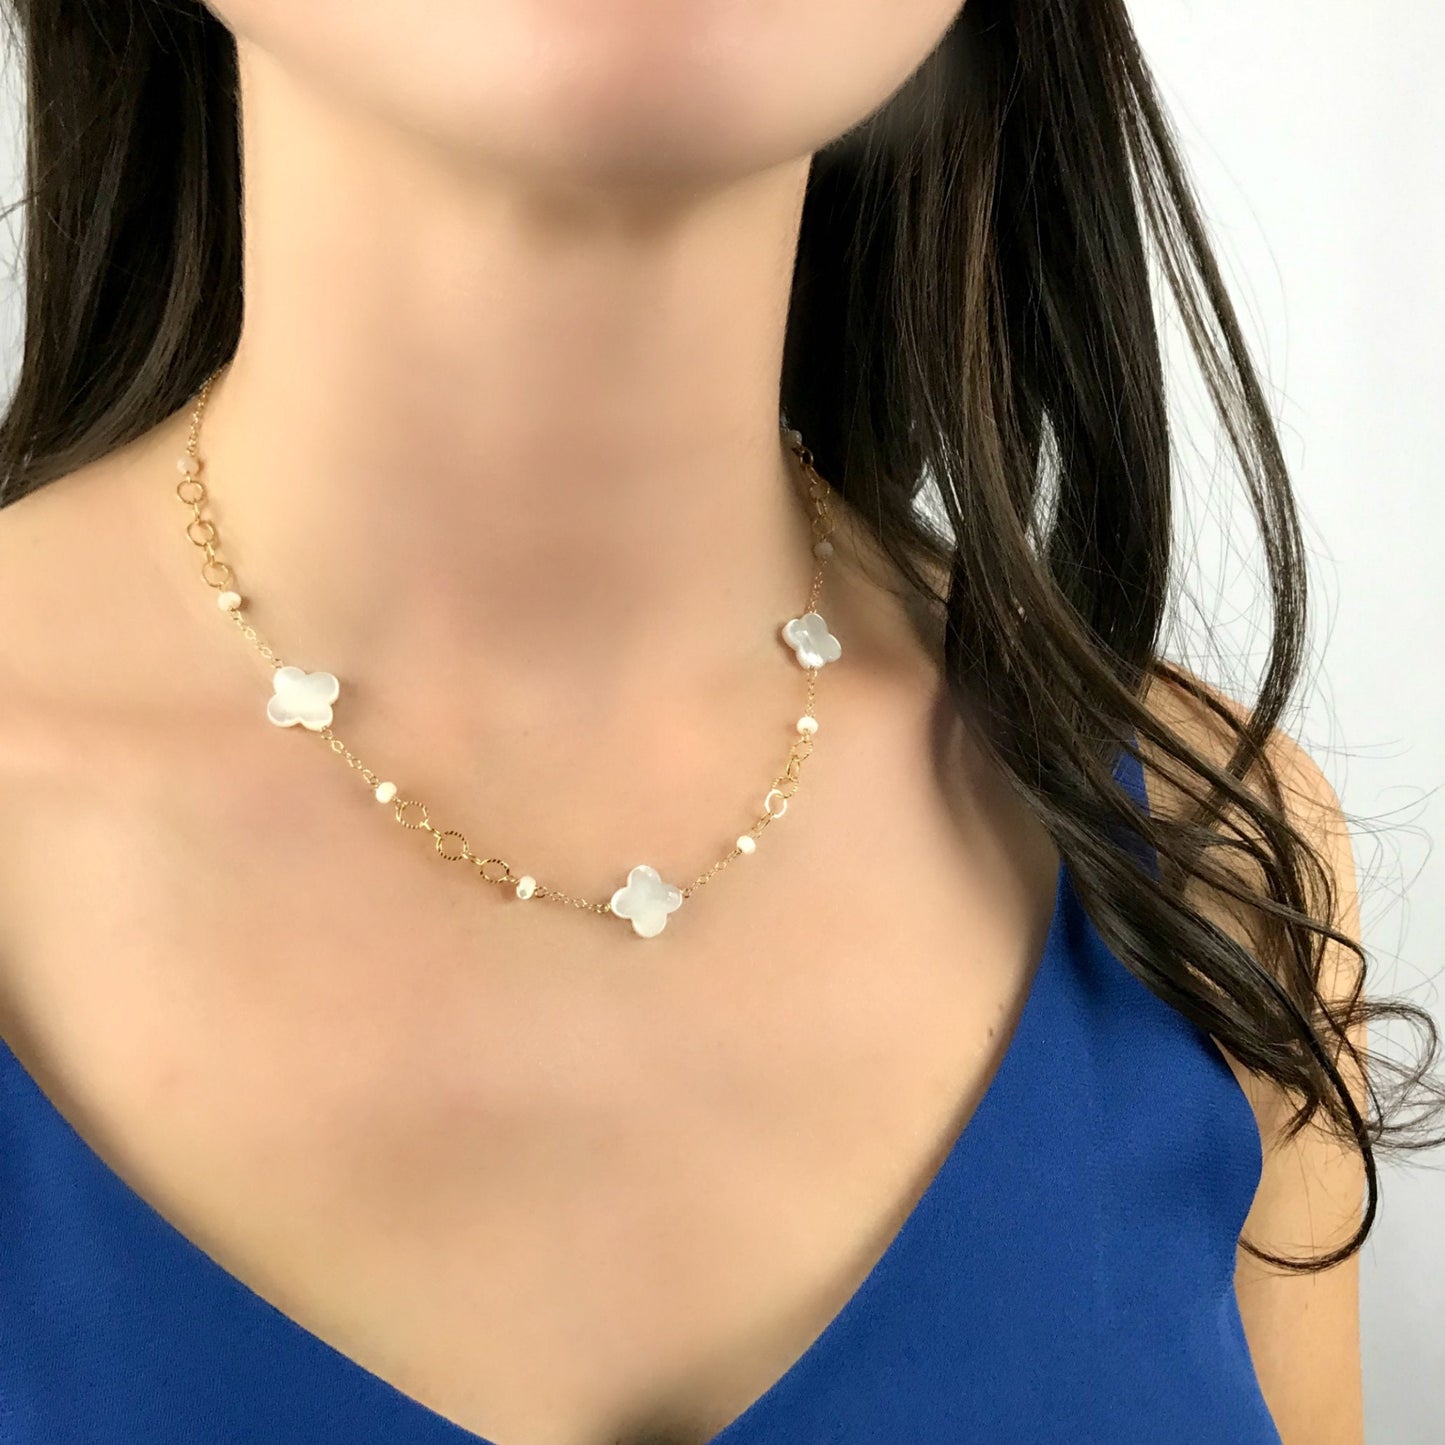 Mother of Pearl Necklace Choker Necklace Boho Necklace Statement Necklace Pearl Necklace Delicate Necklace Handmade Necklace White Necklace